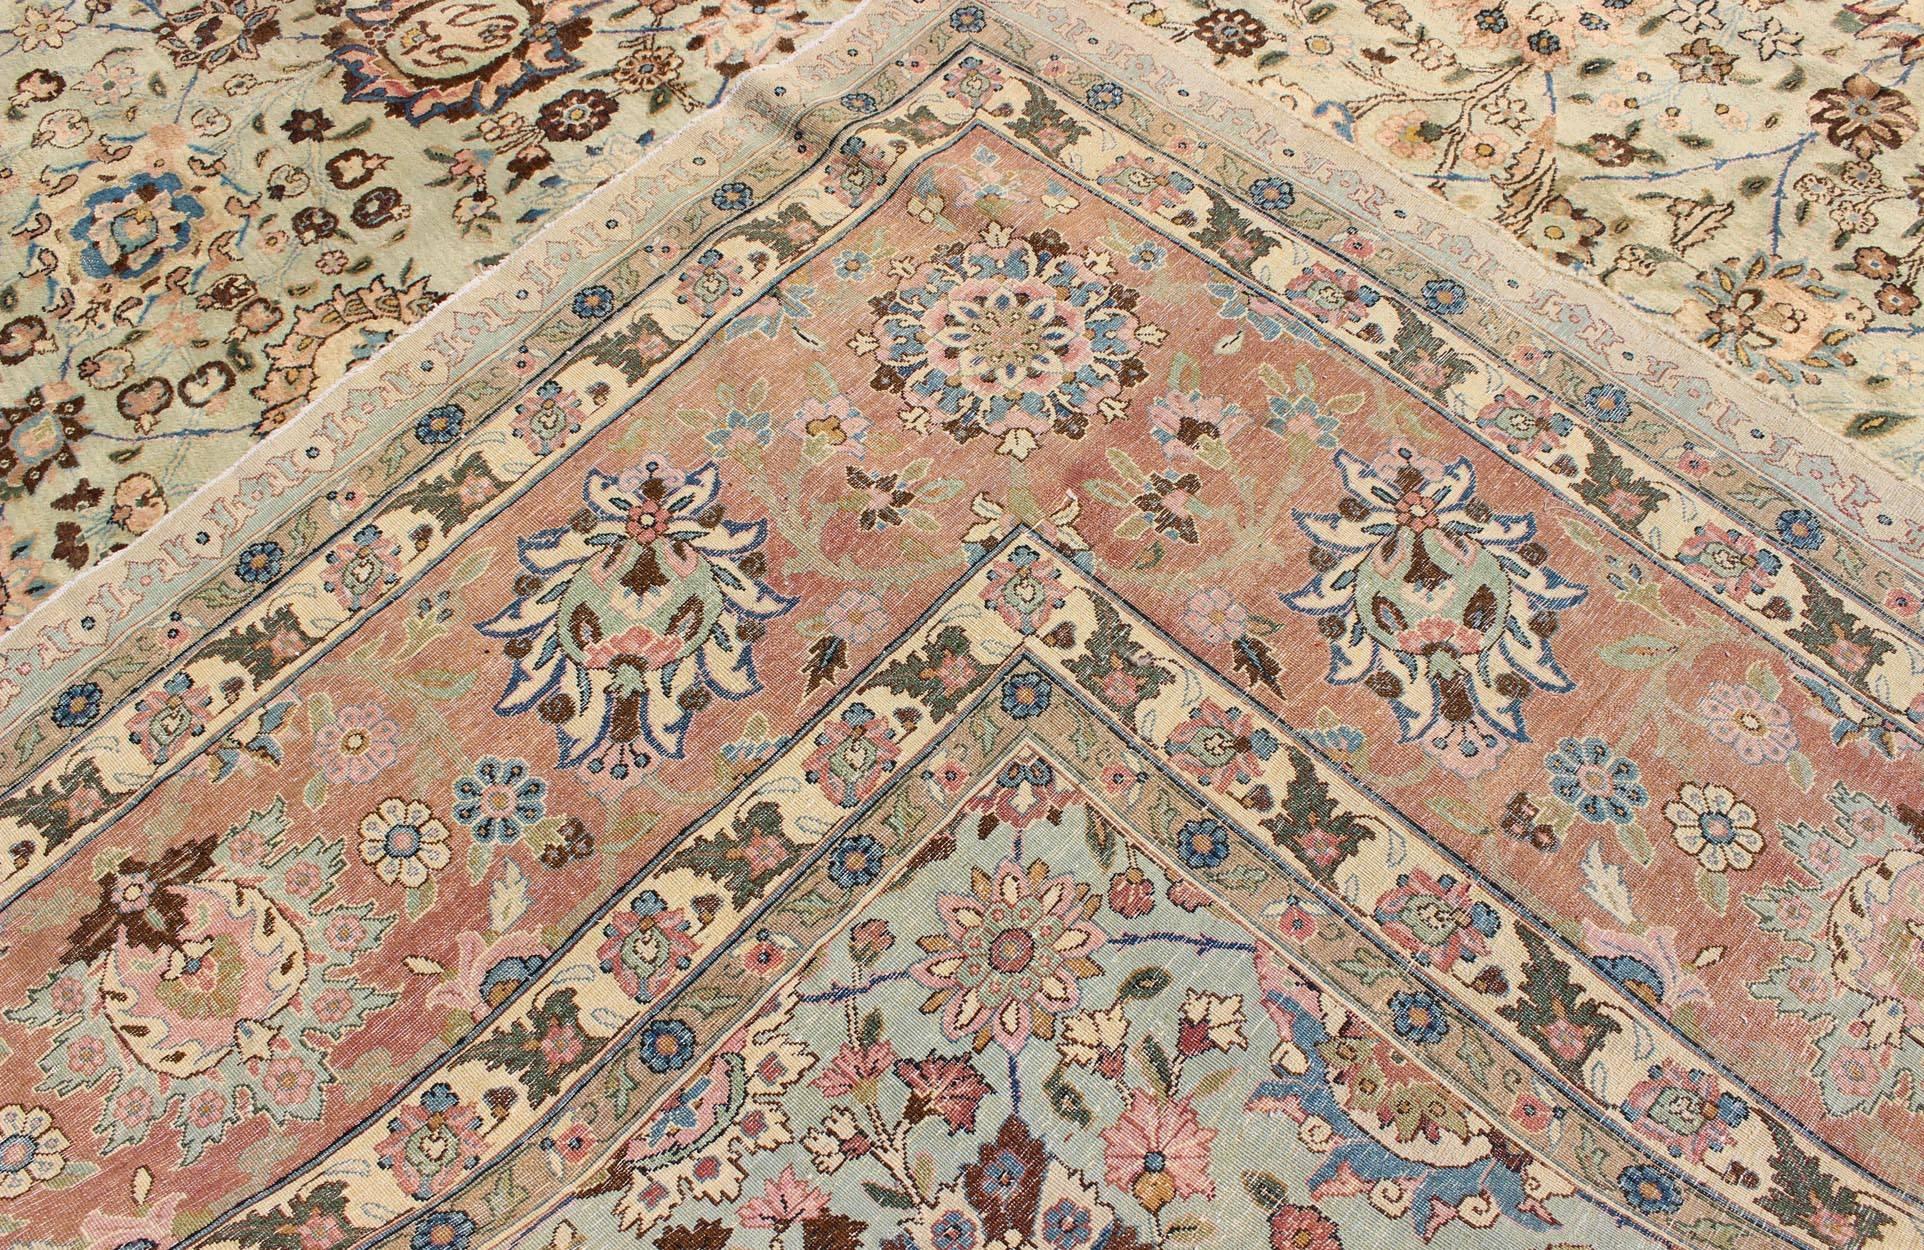 Wool Vintage Persian Tabriz Rug, Intricate Floral Design in Light Green and Salmon